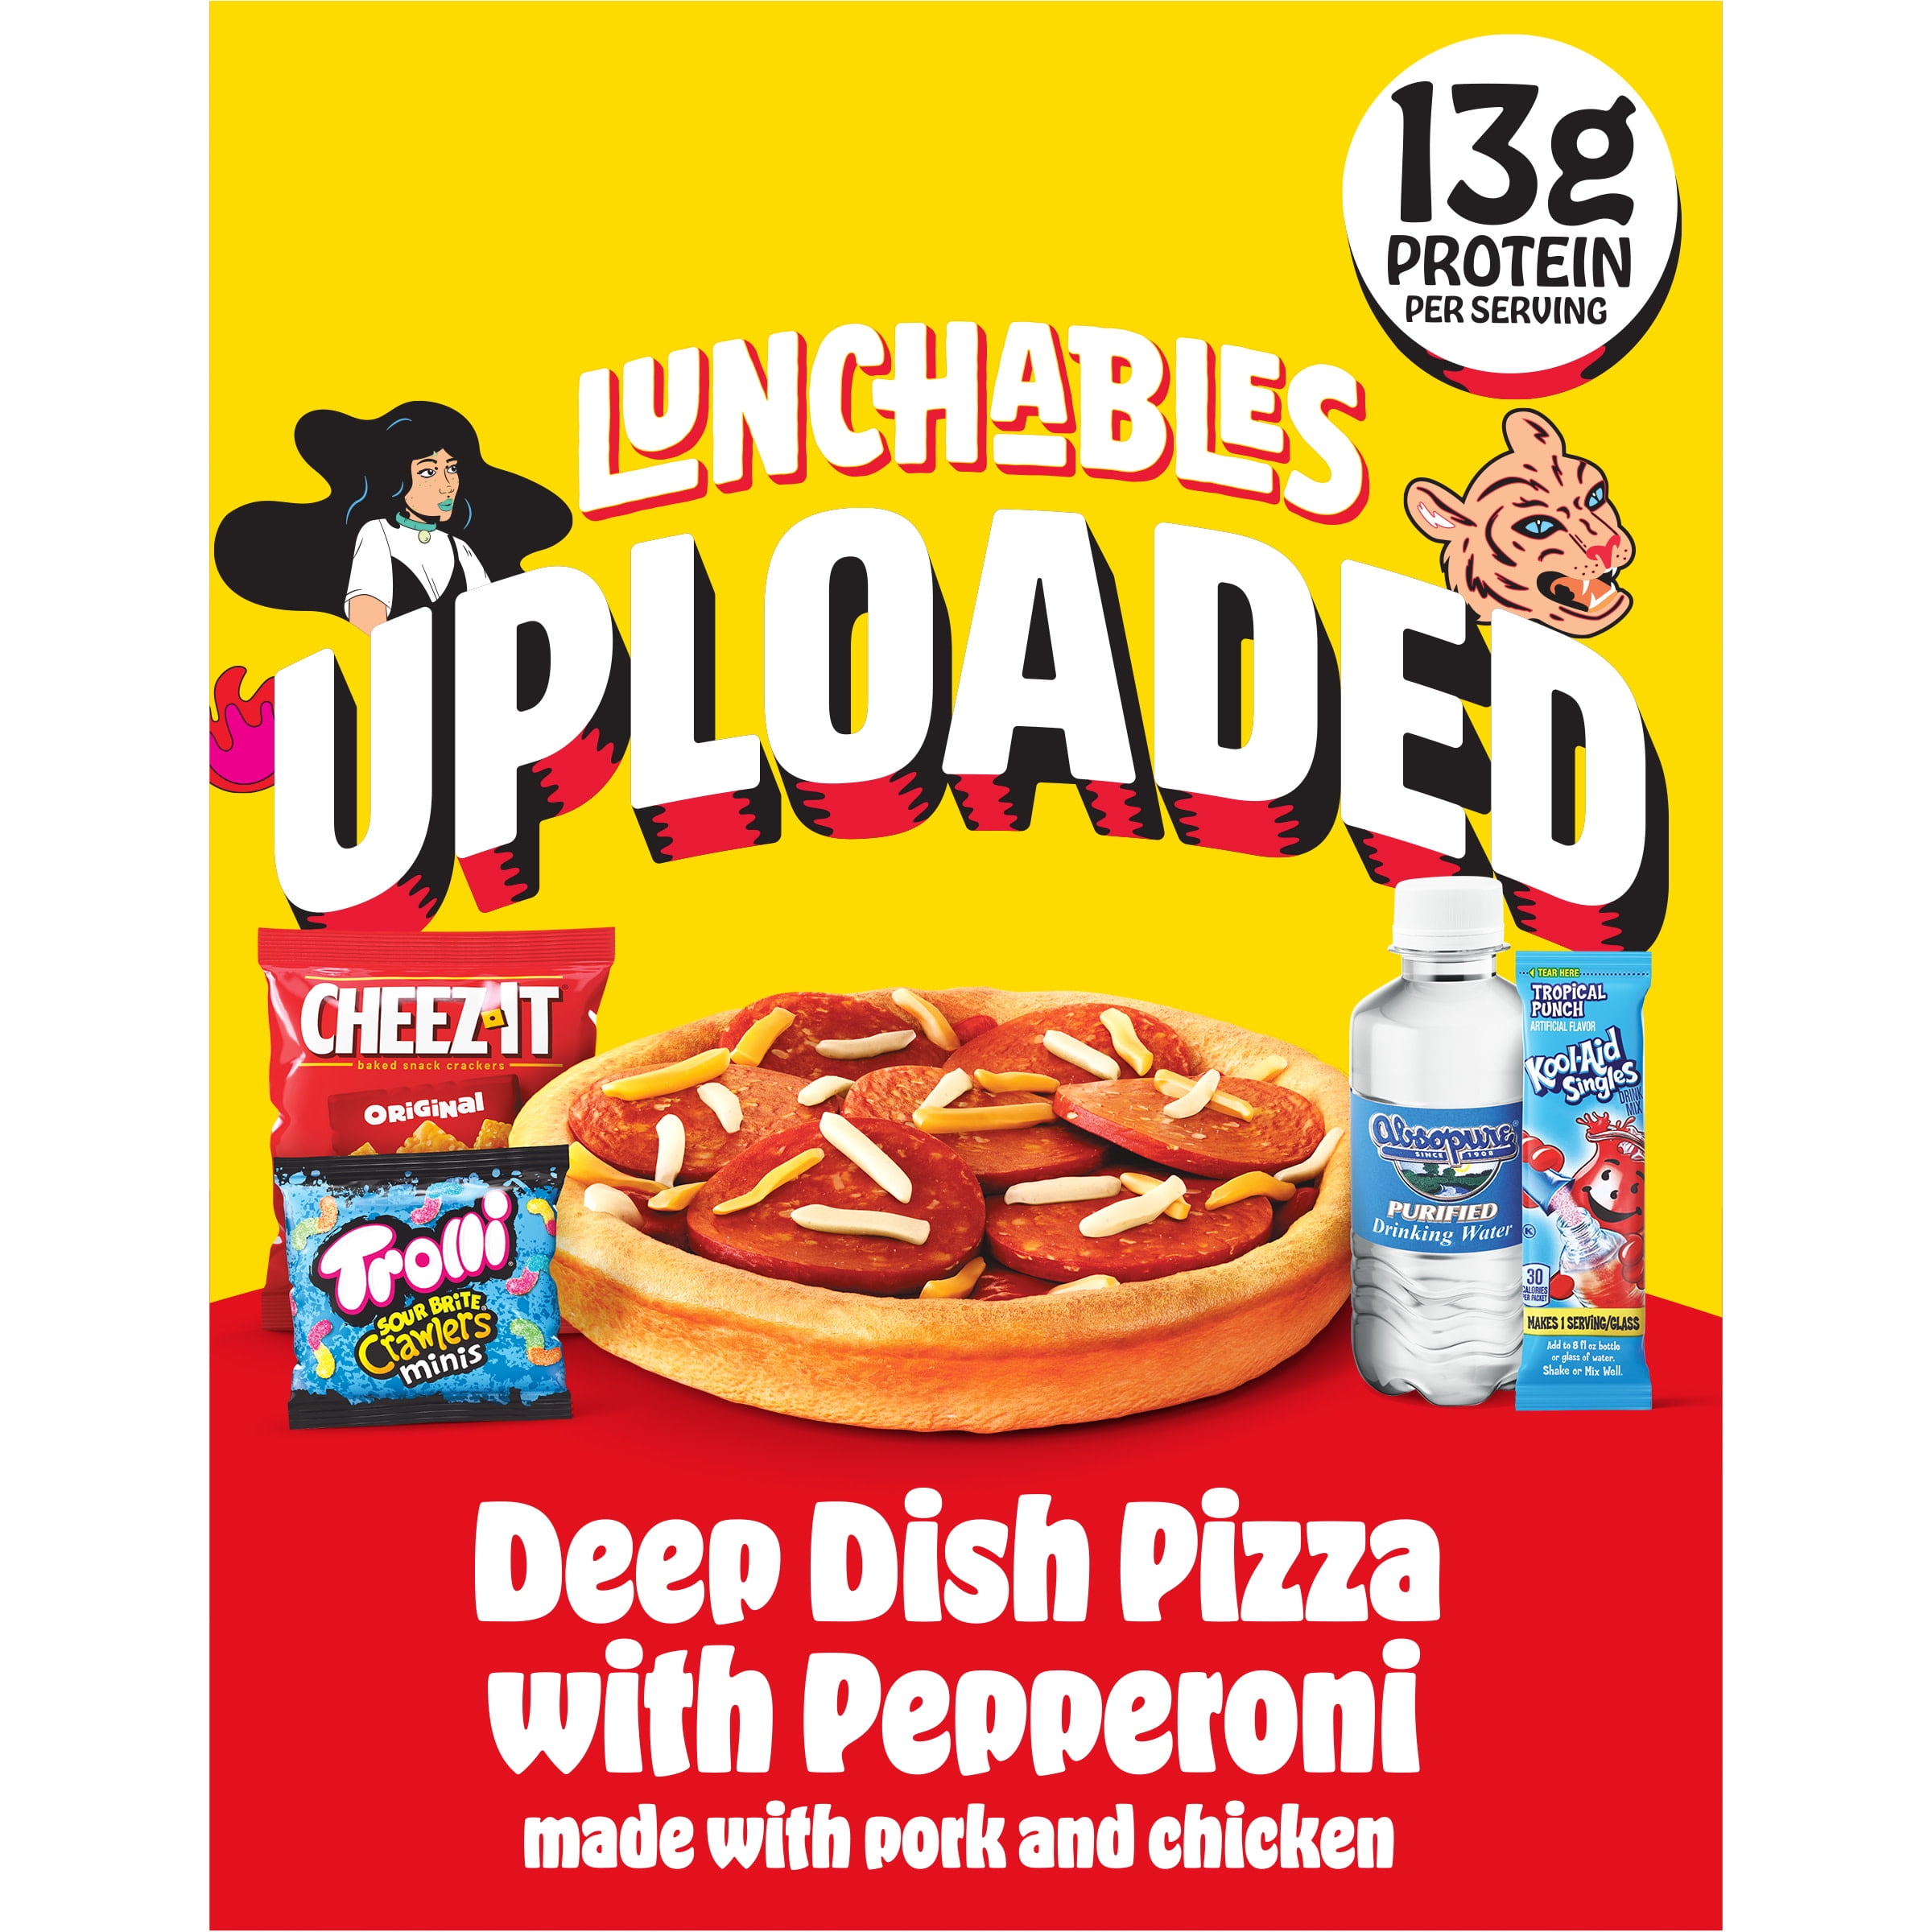 Lunchables Uploaded Deep Dish Pizza with Perpperoni Kids Lunch Meal Kit